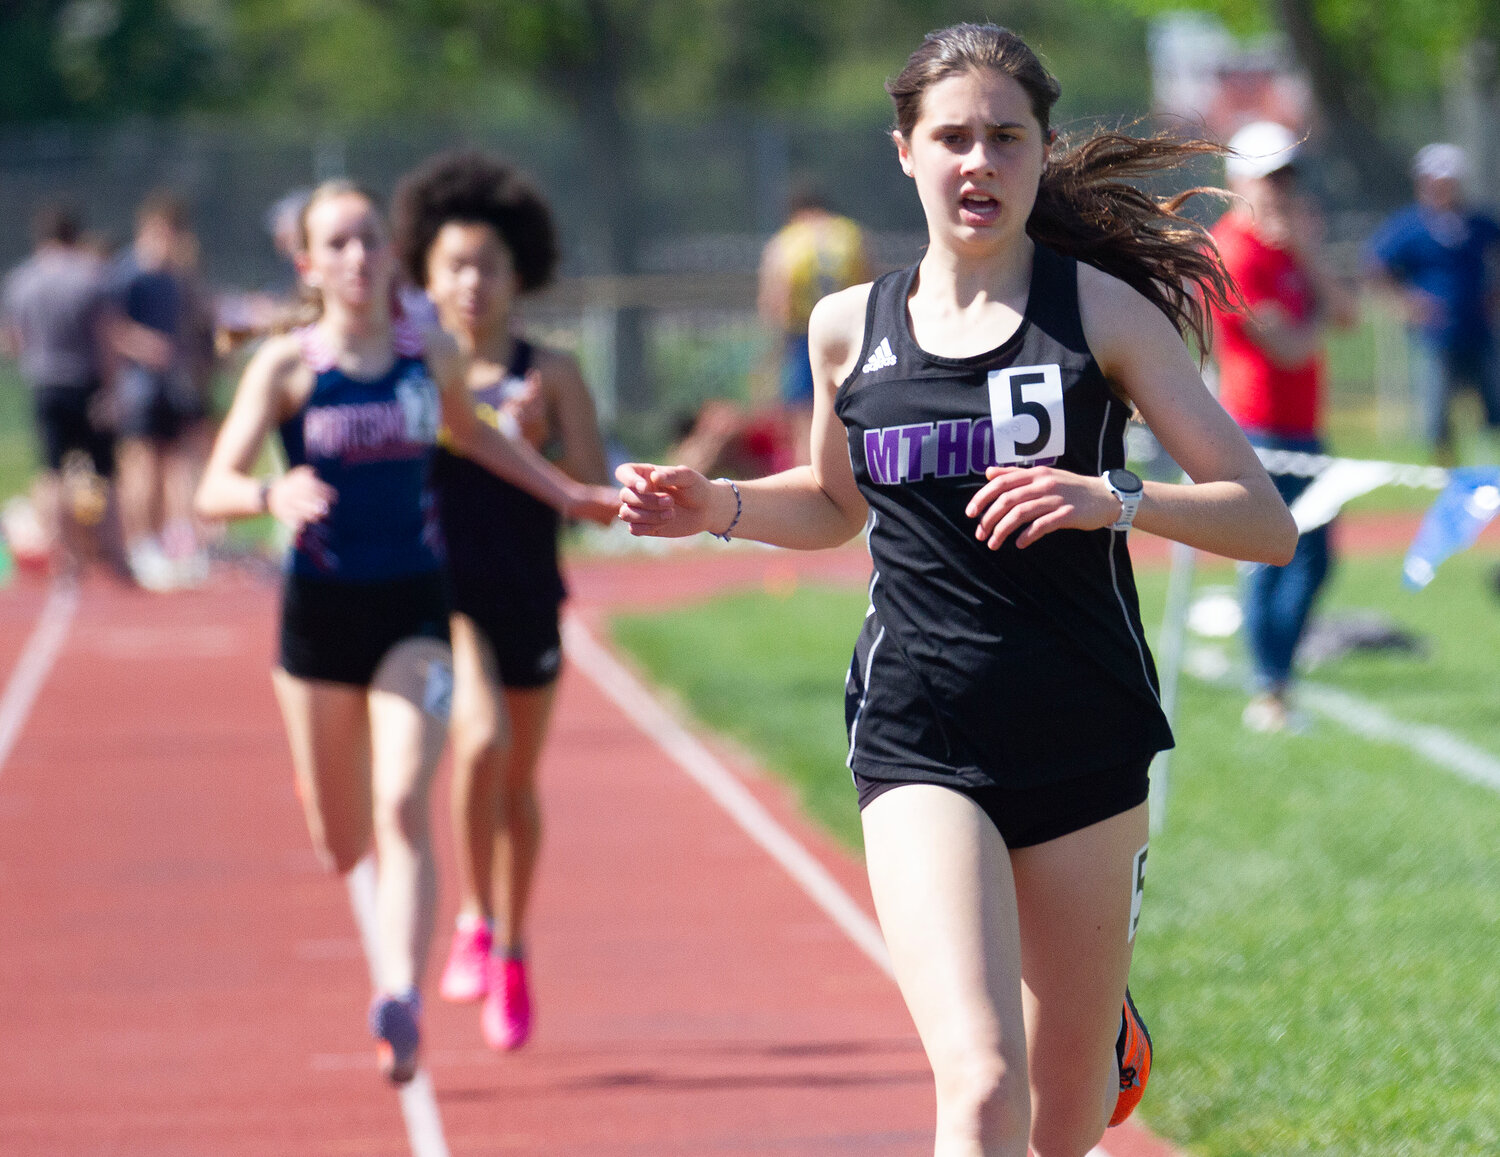 Freshman Jessica Deal heads for the finish line during the 1500 meter run, in front of Portsmouth’s Allie Kaull and St. Rays’ Chandaniey Boyce. She won the race with a time of 5:01.56. Deal also won the 3000 meter run.